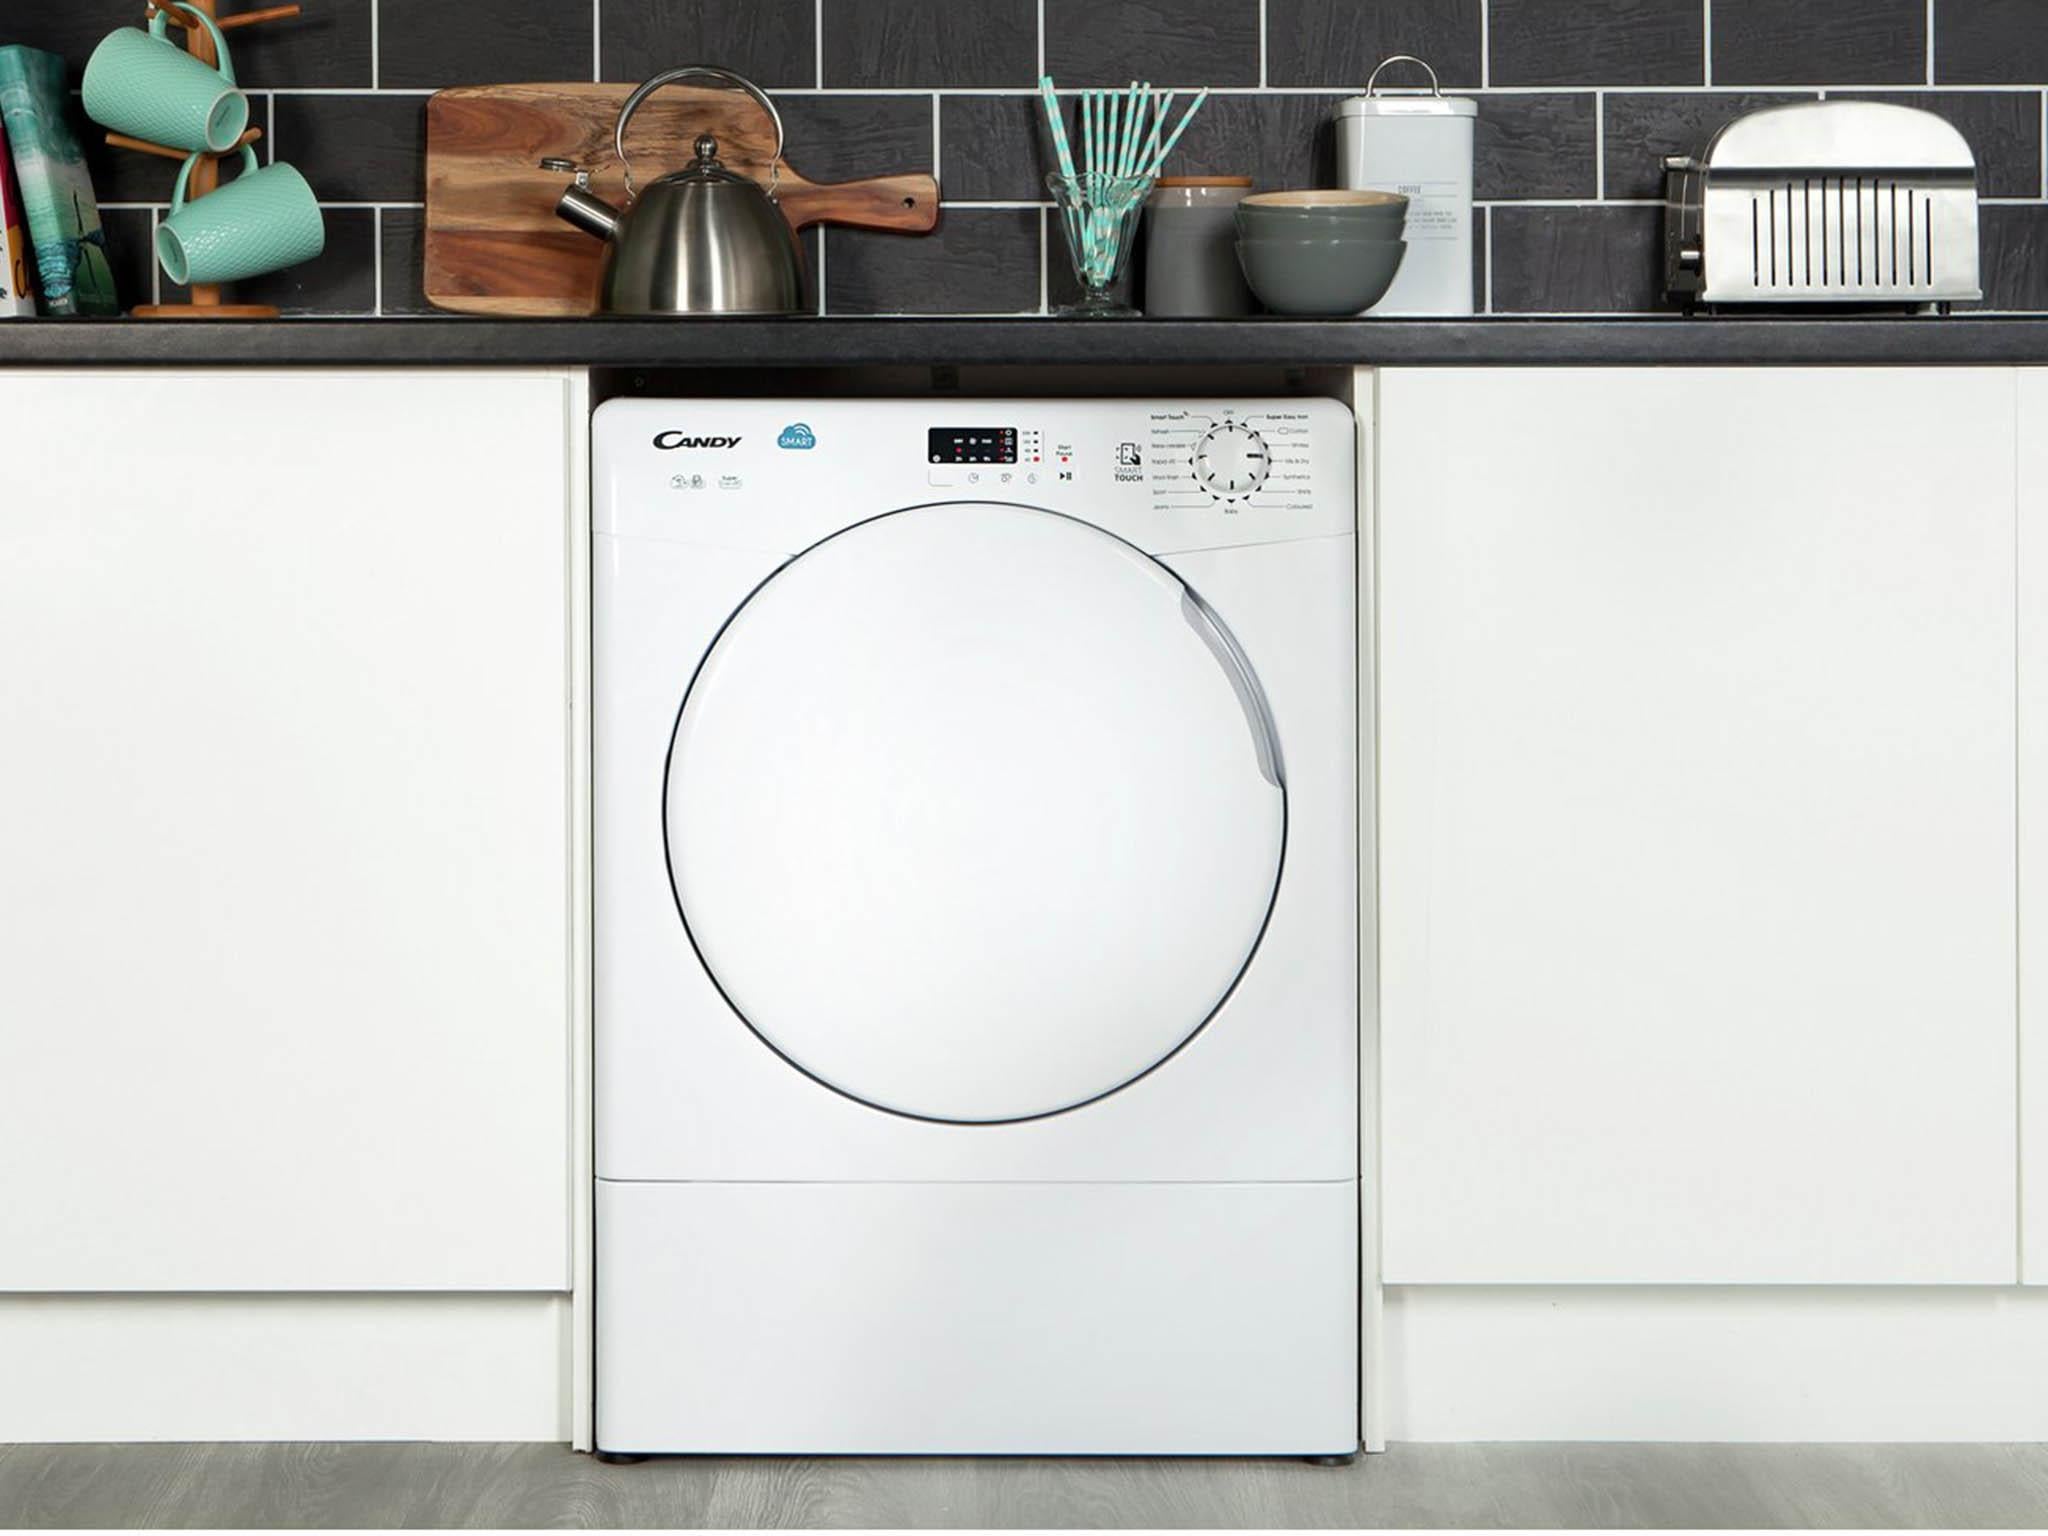 Controlling your dishwasher or washing machine from afar is the new way to do chores